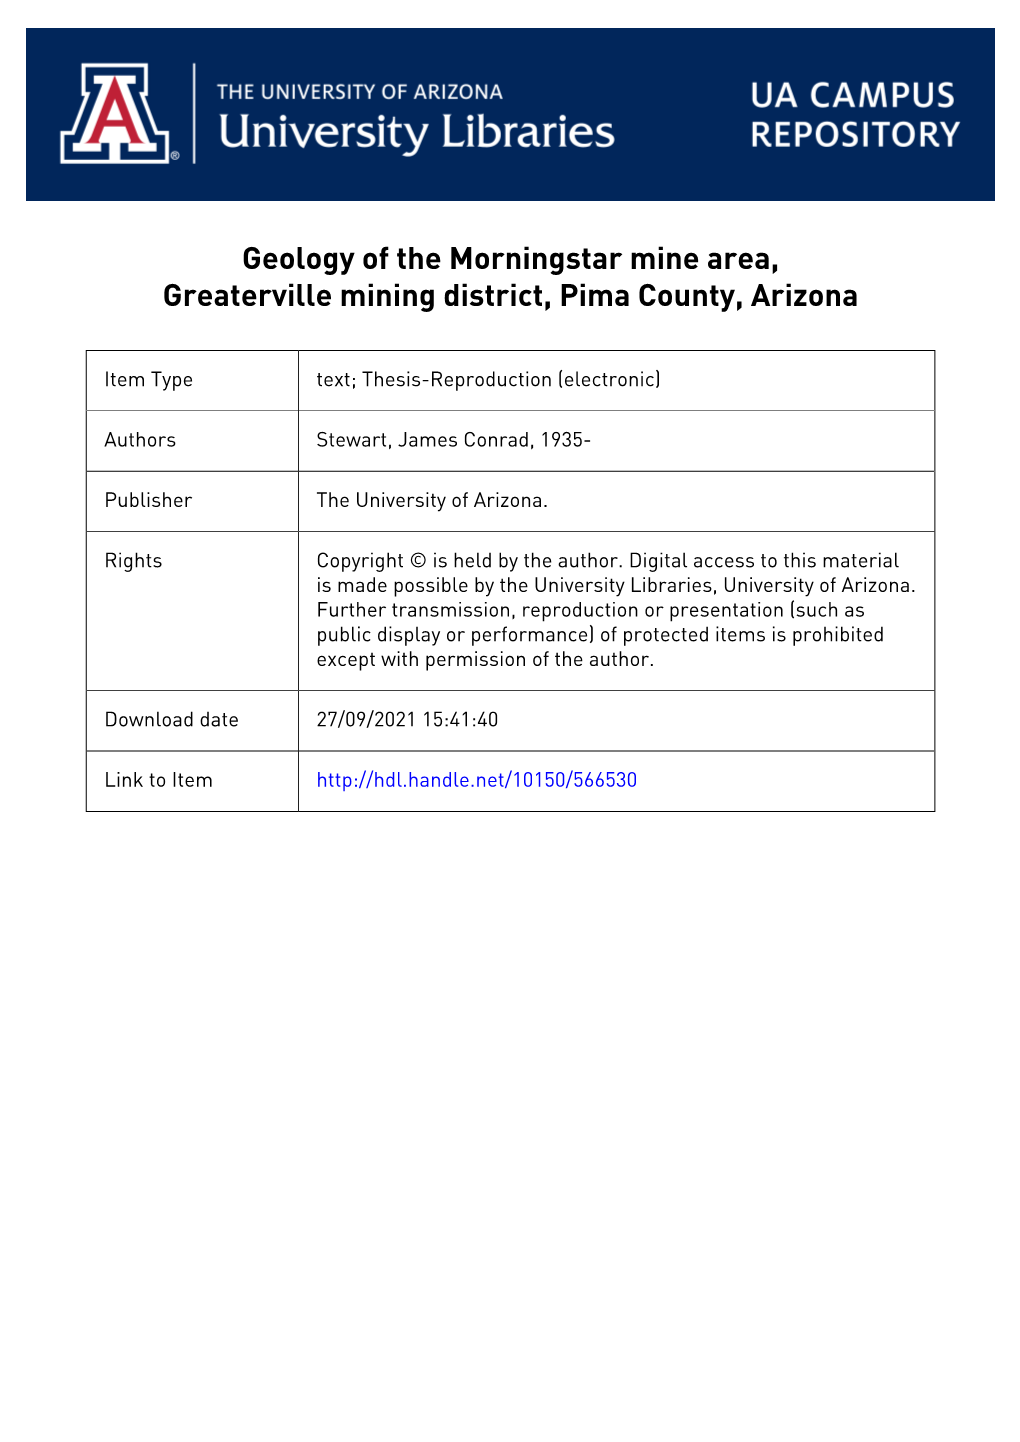 Geology of the Morningstar Mine Area, Greaterville Mining District, Pima County, Arizona